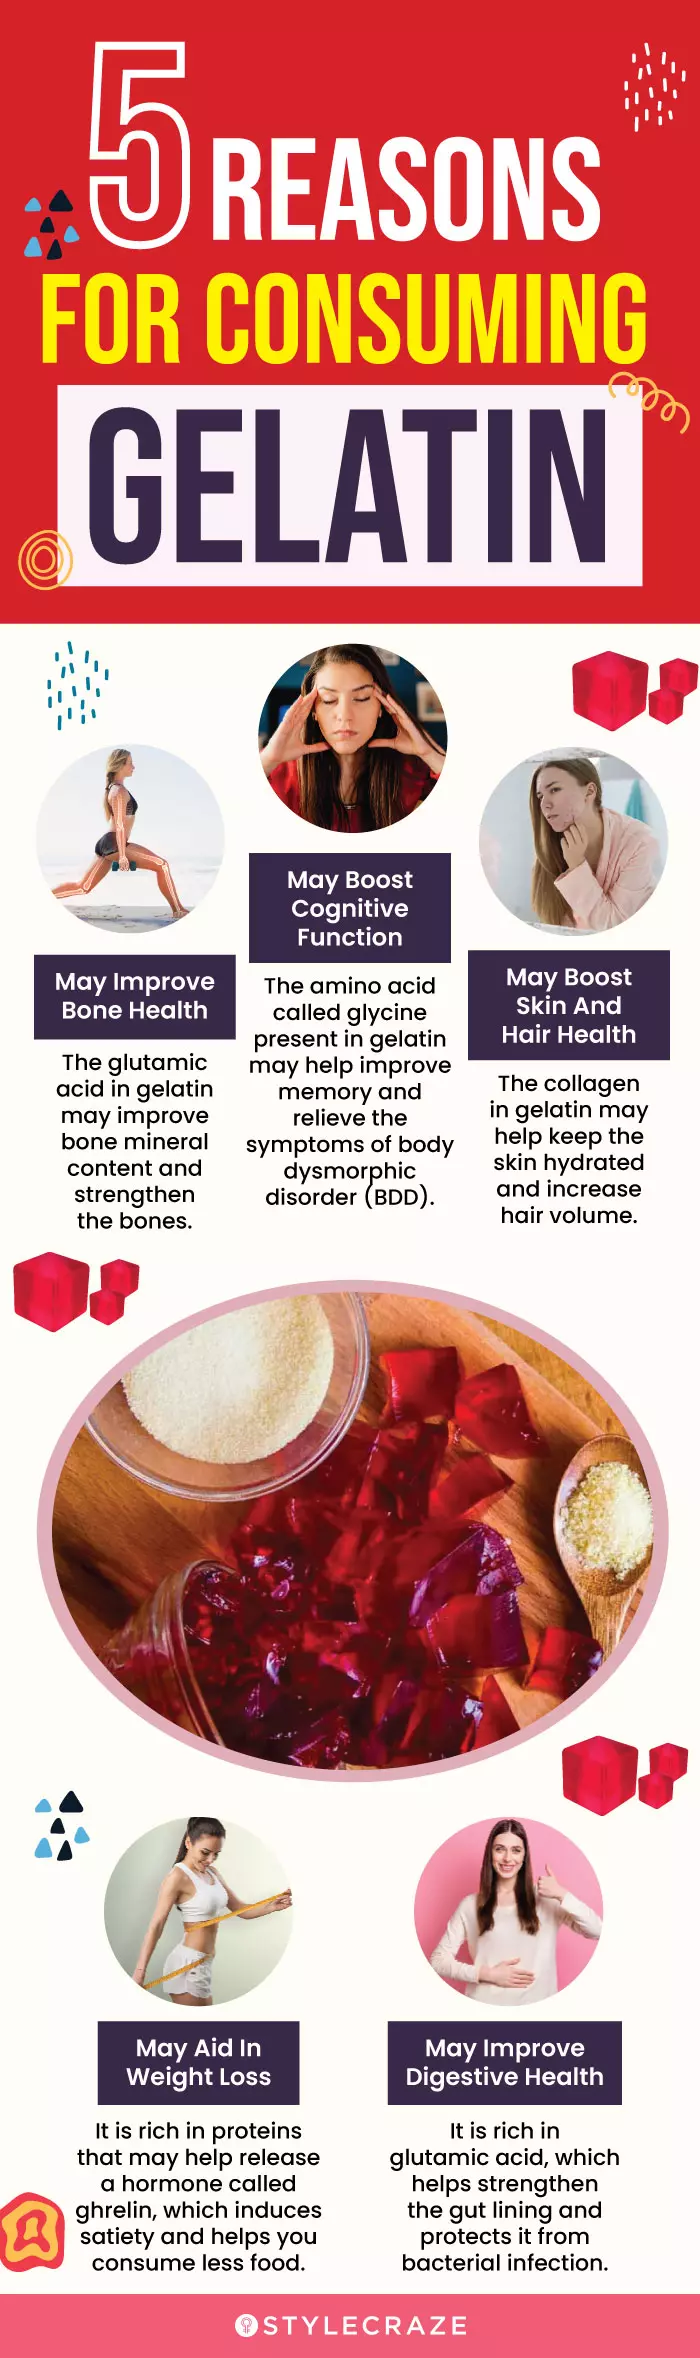 5 reasons for using gelatin (infographic)